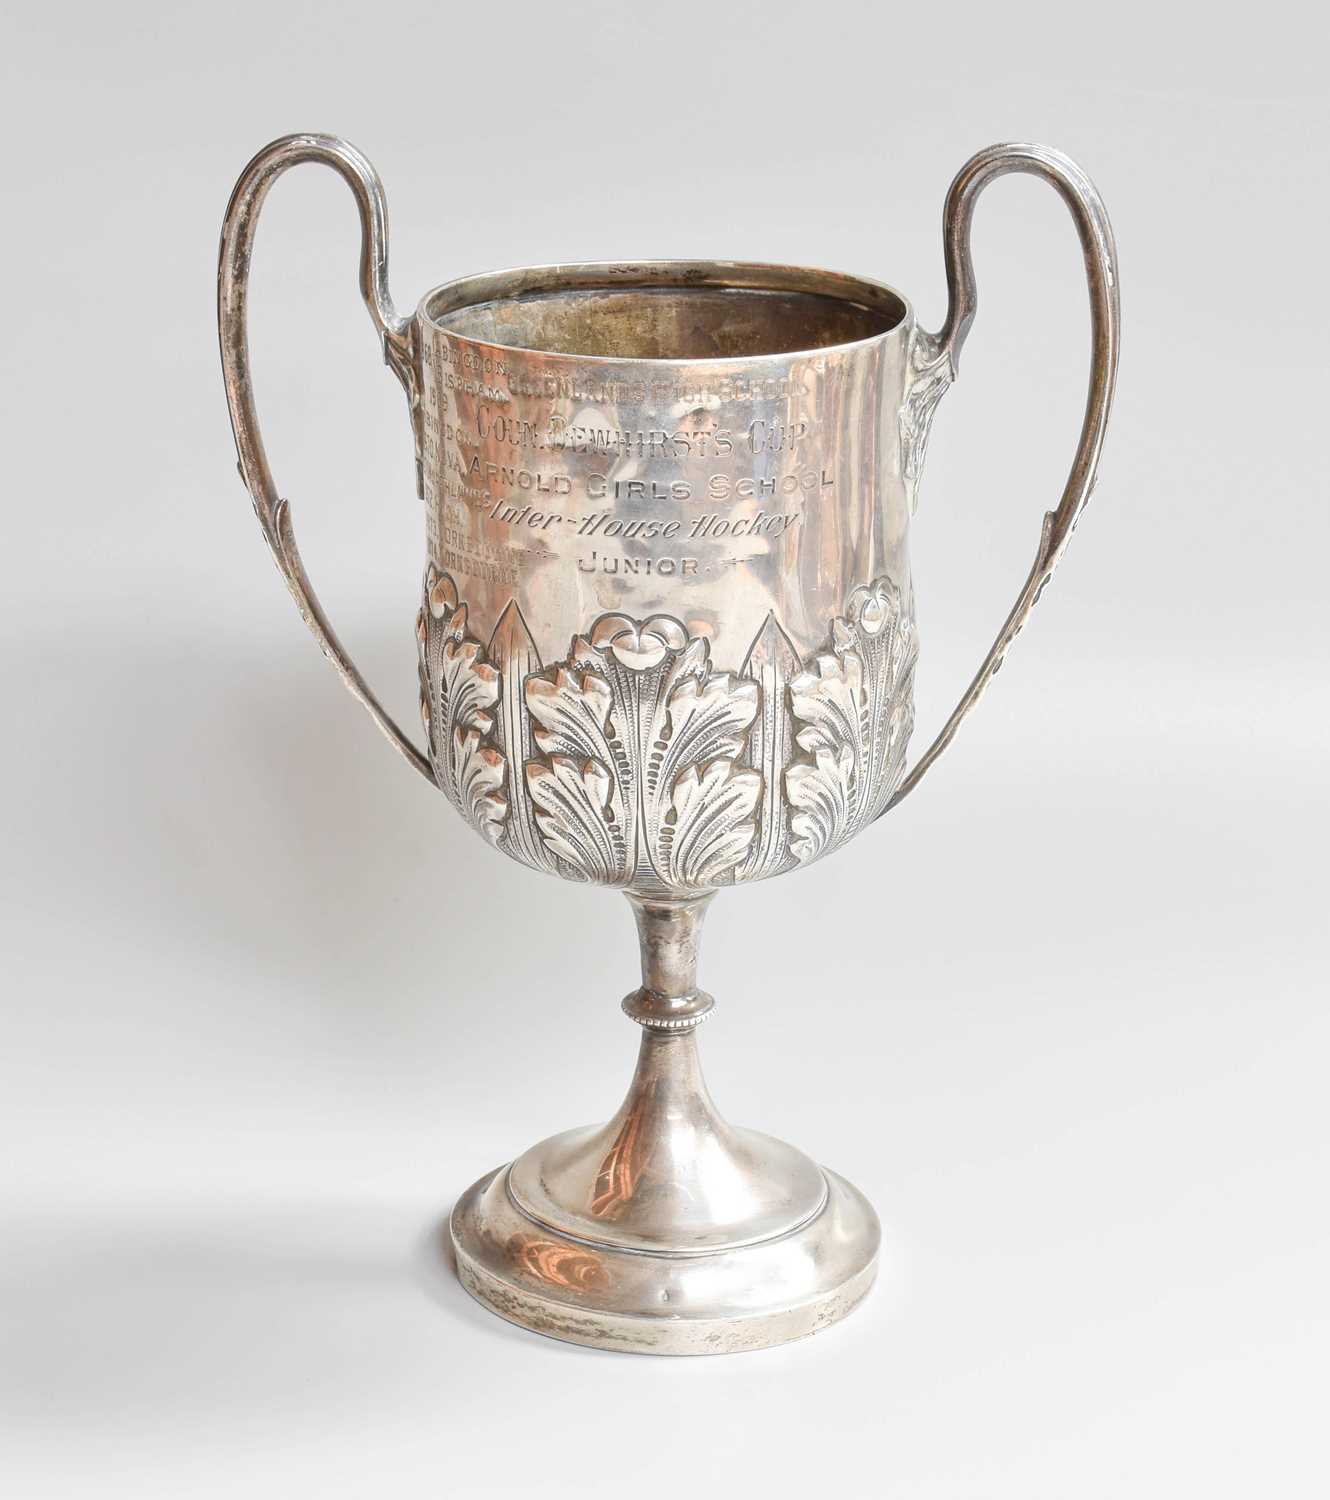 A Victorian Silver Two-Handled Trophy-Cup, by William Hutton and Sons Ltd., London, 1899, the